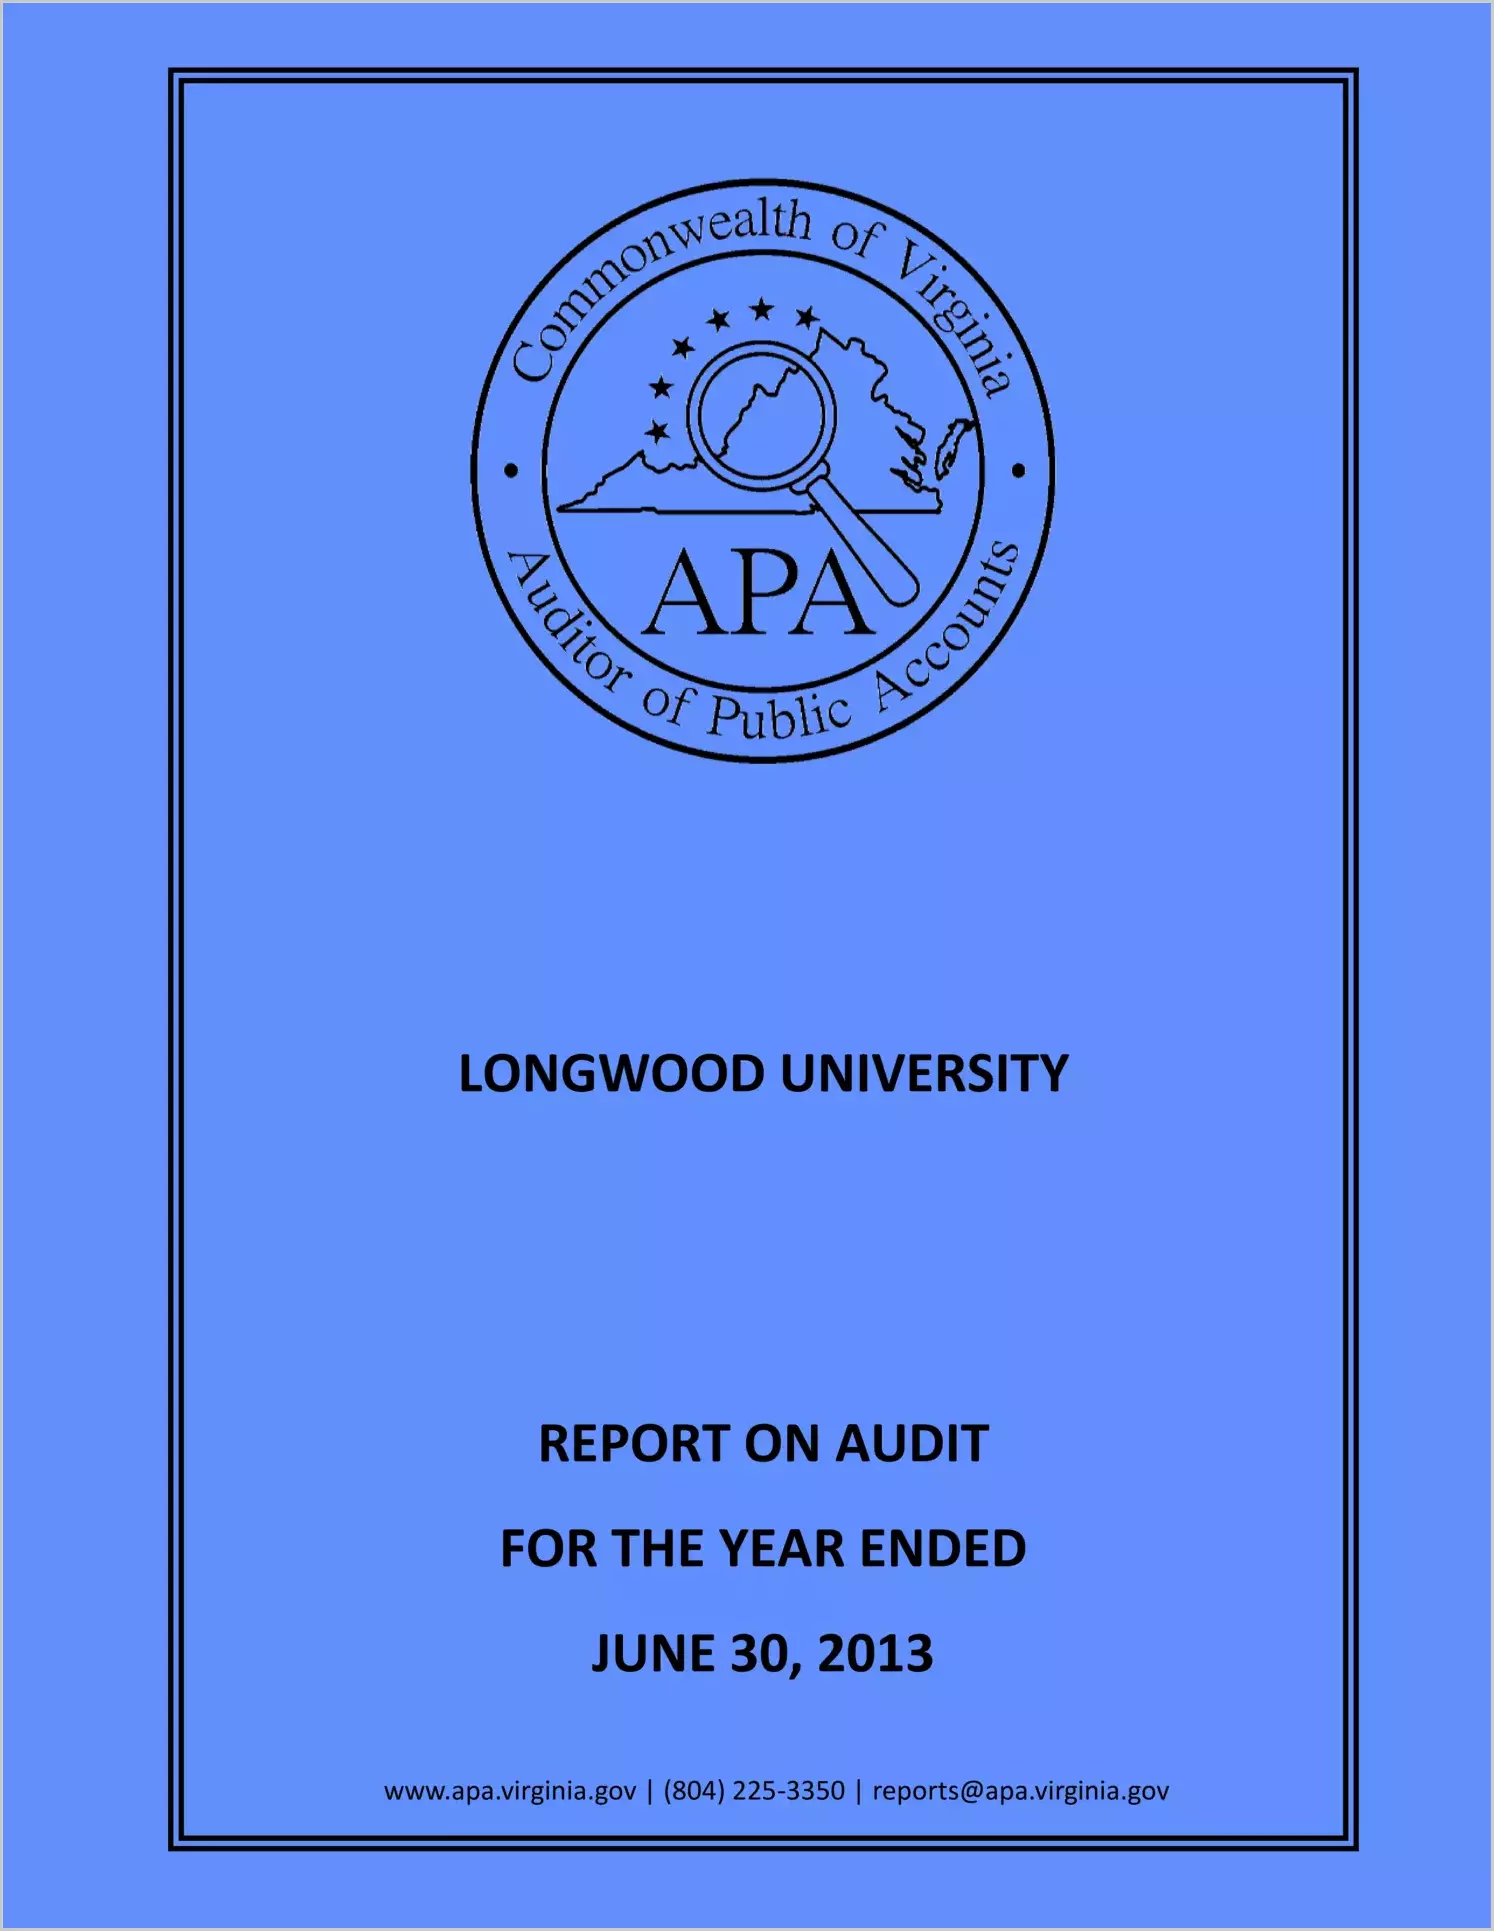 Longwood University report on audit for the year ended June 30, 2013